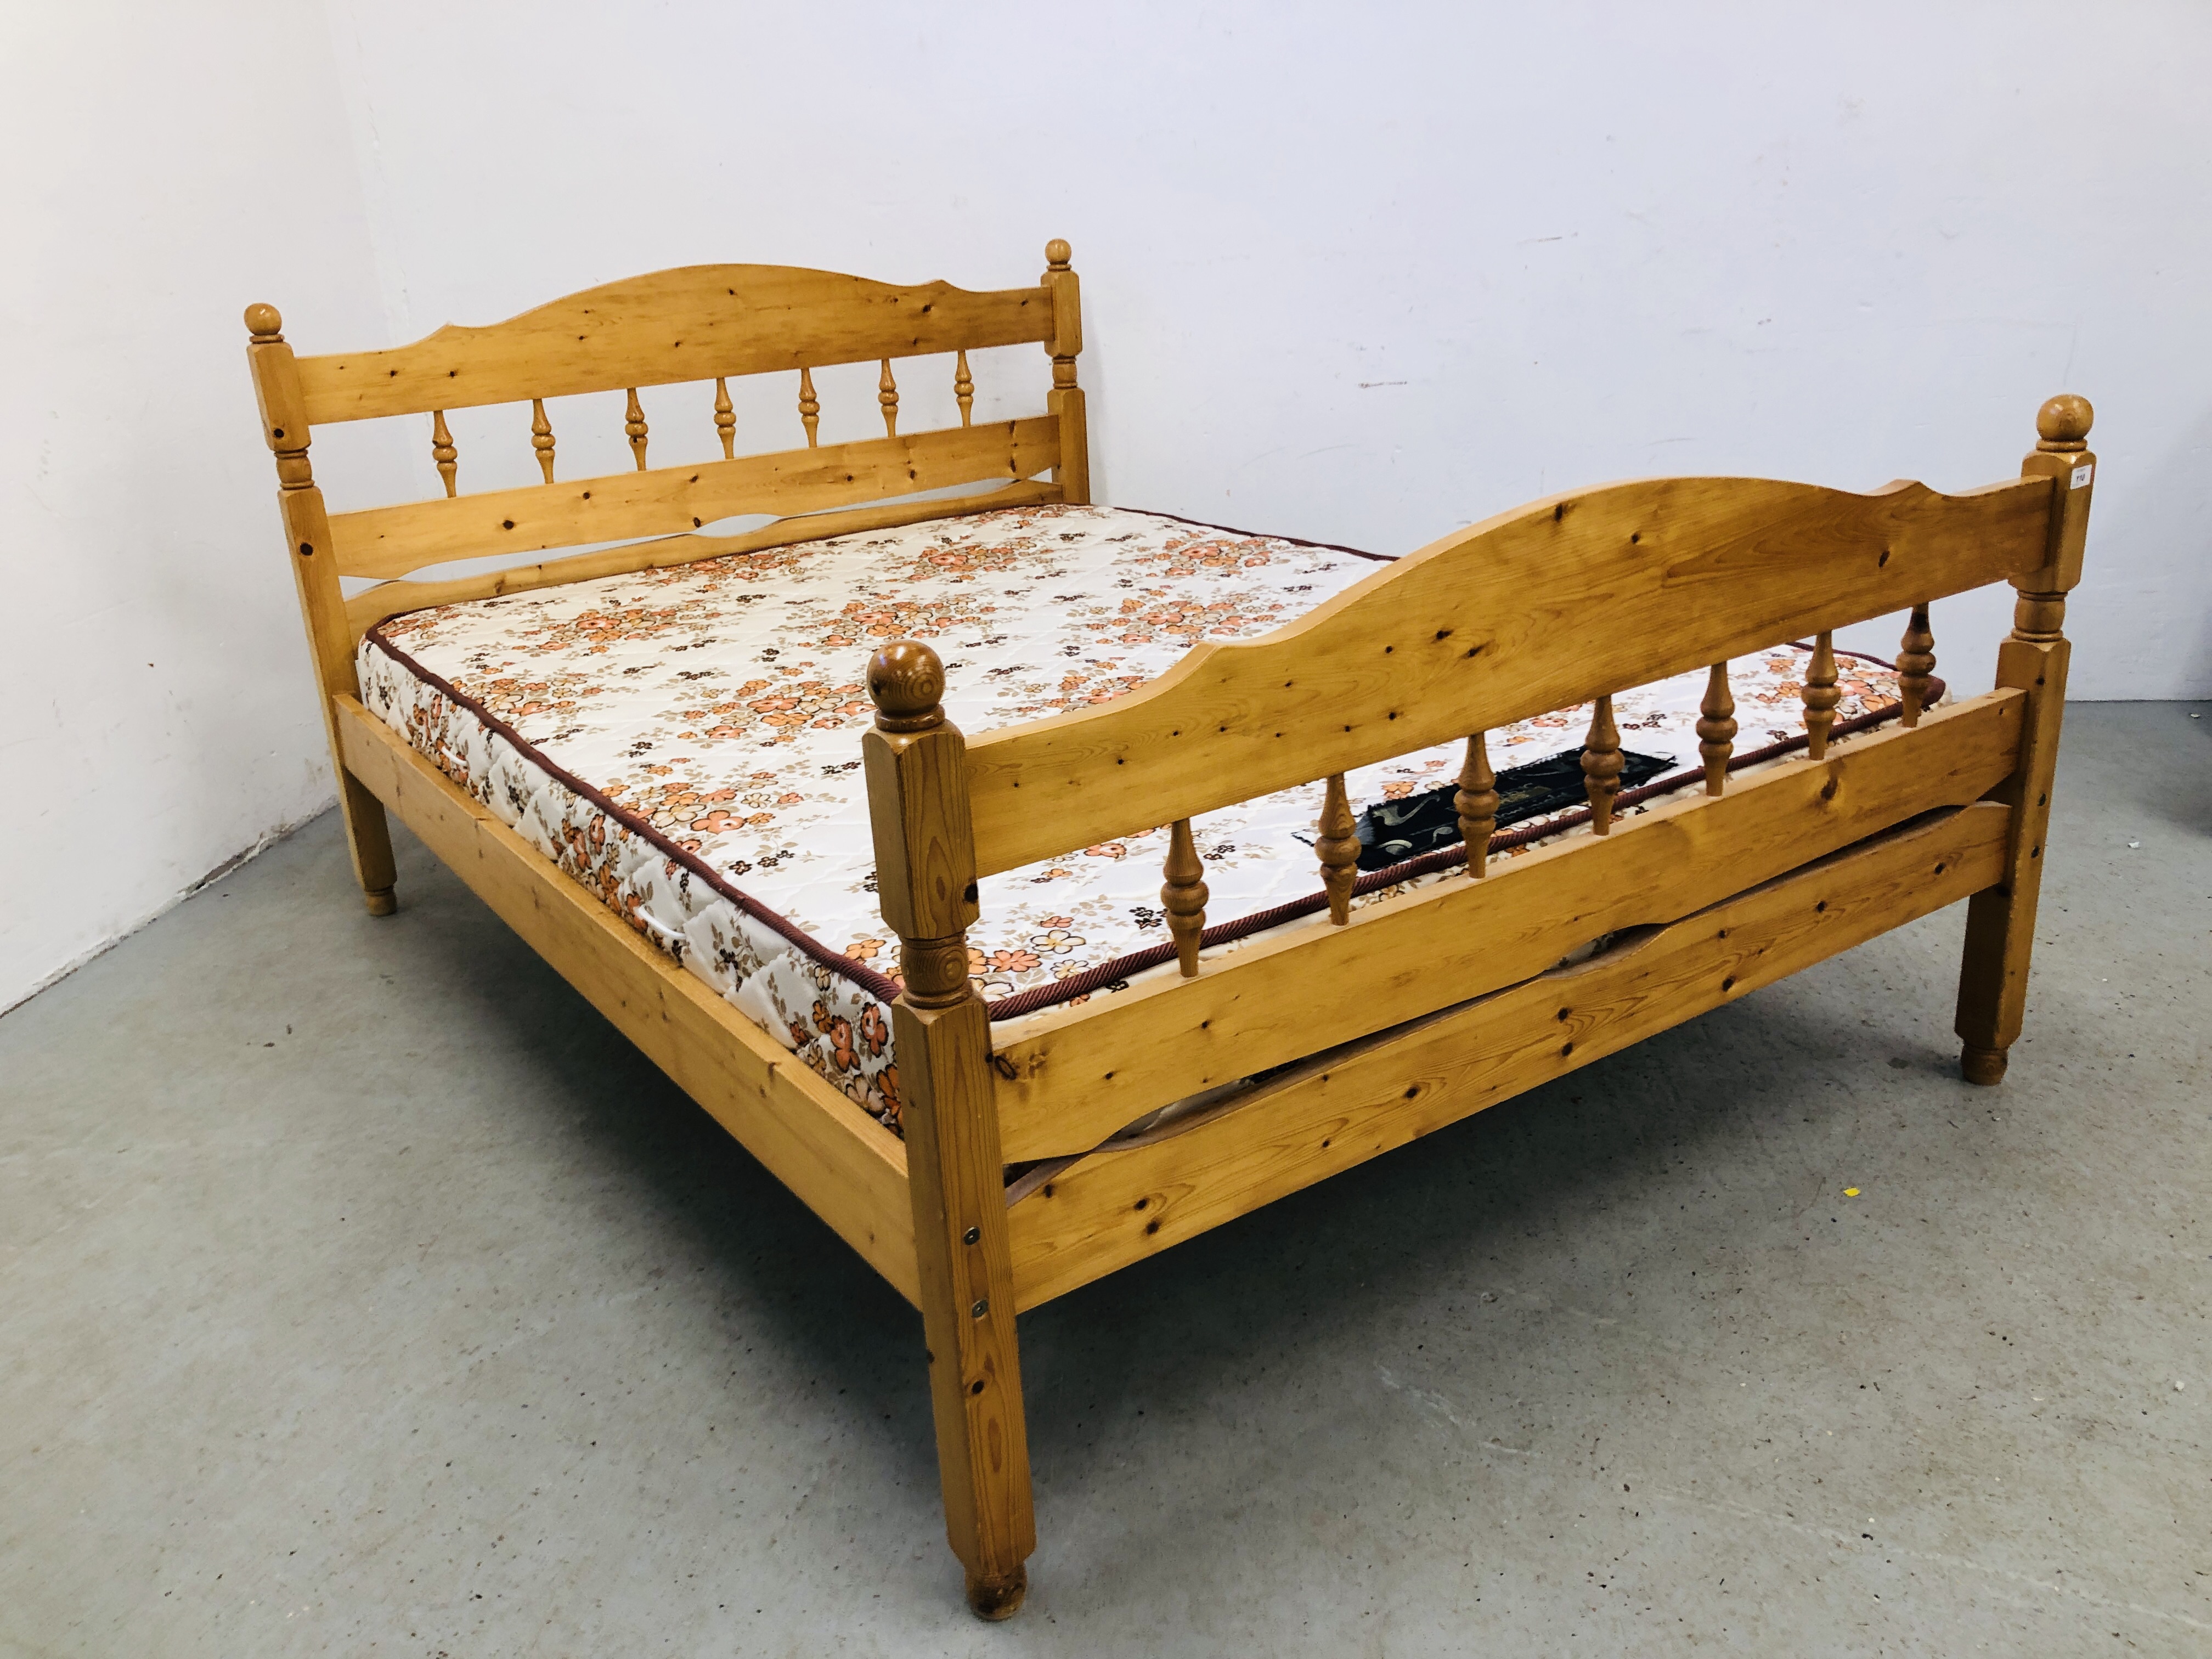 A PINE FRAMED DOUBLE BED FRAME WITH SILENT NIGHT FIRMAPEDIC MATTRESS